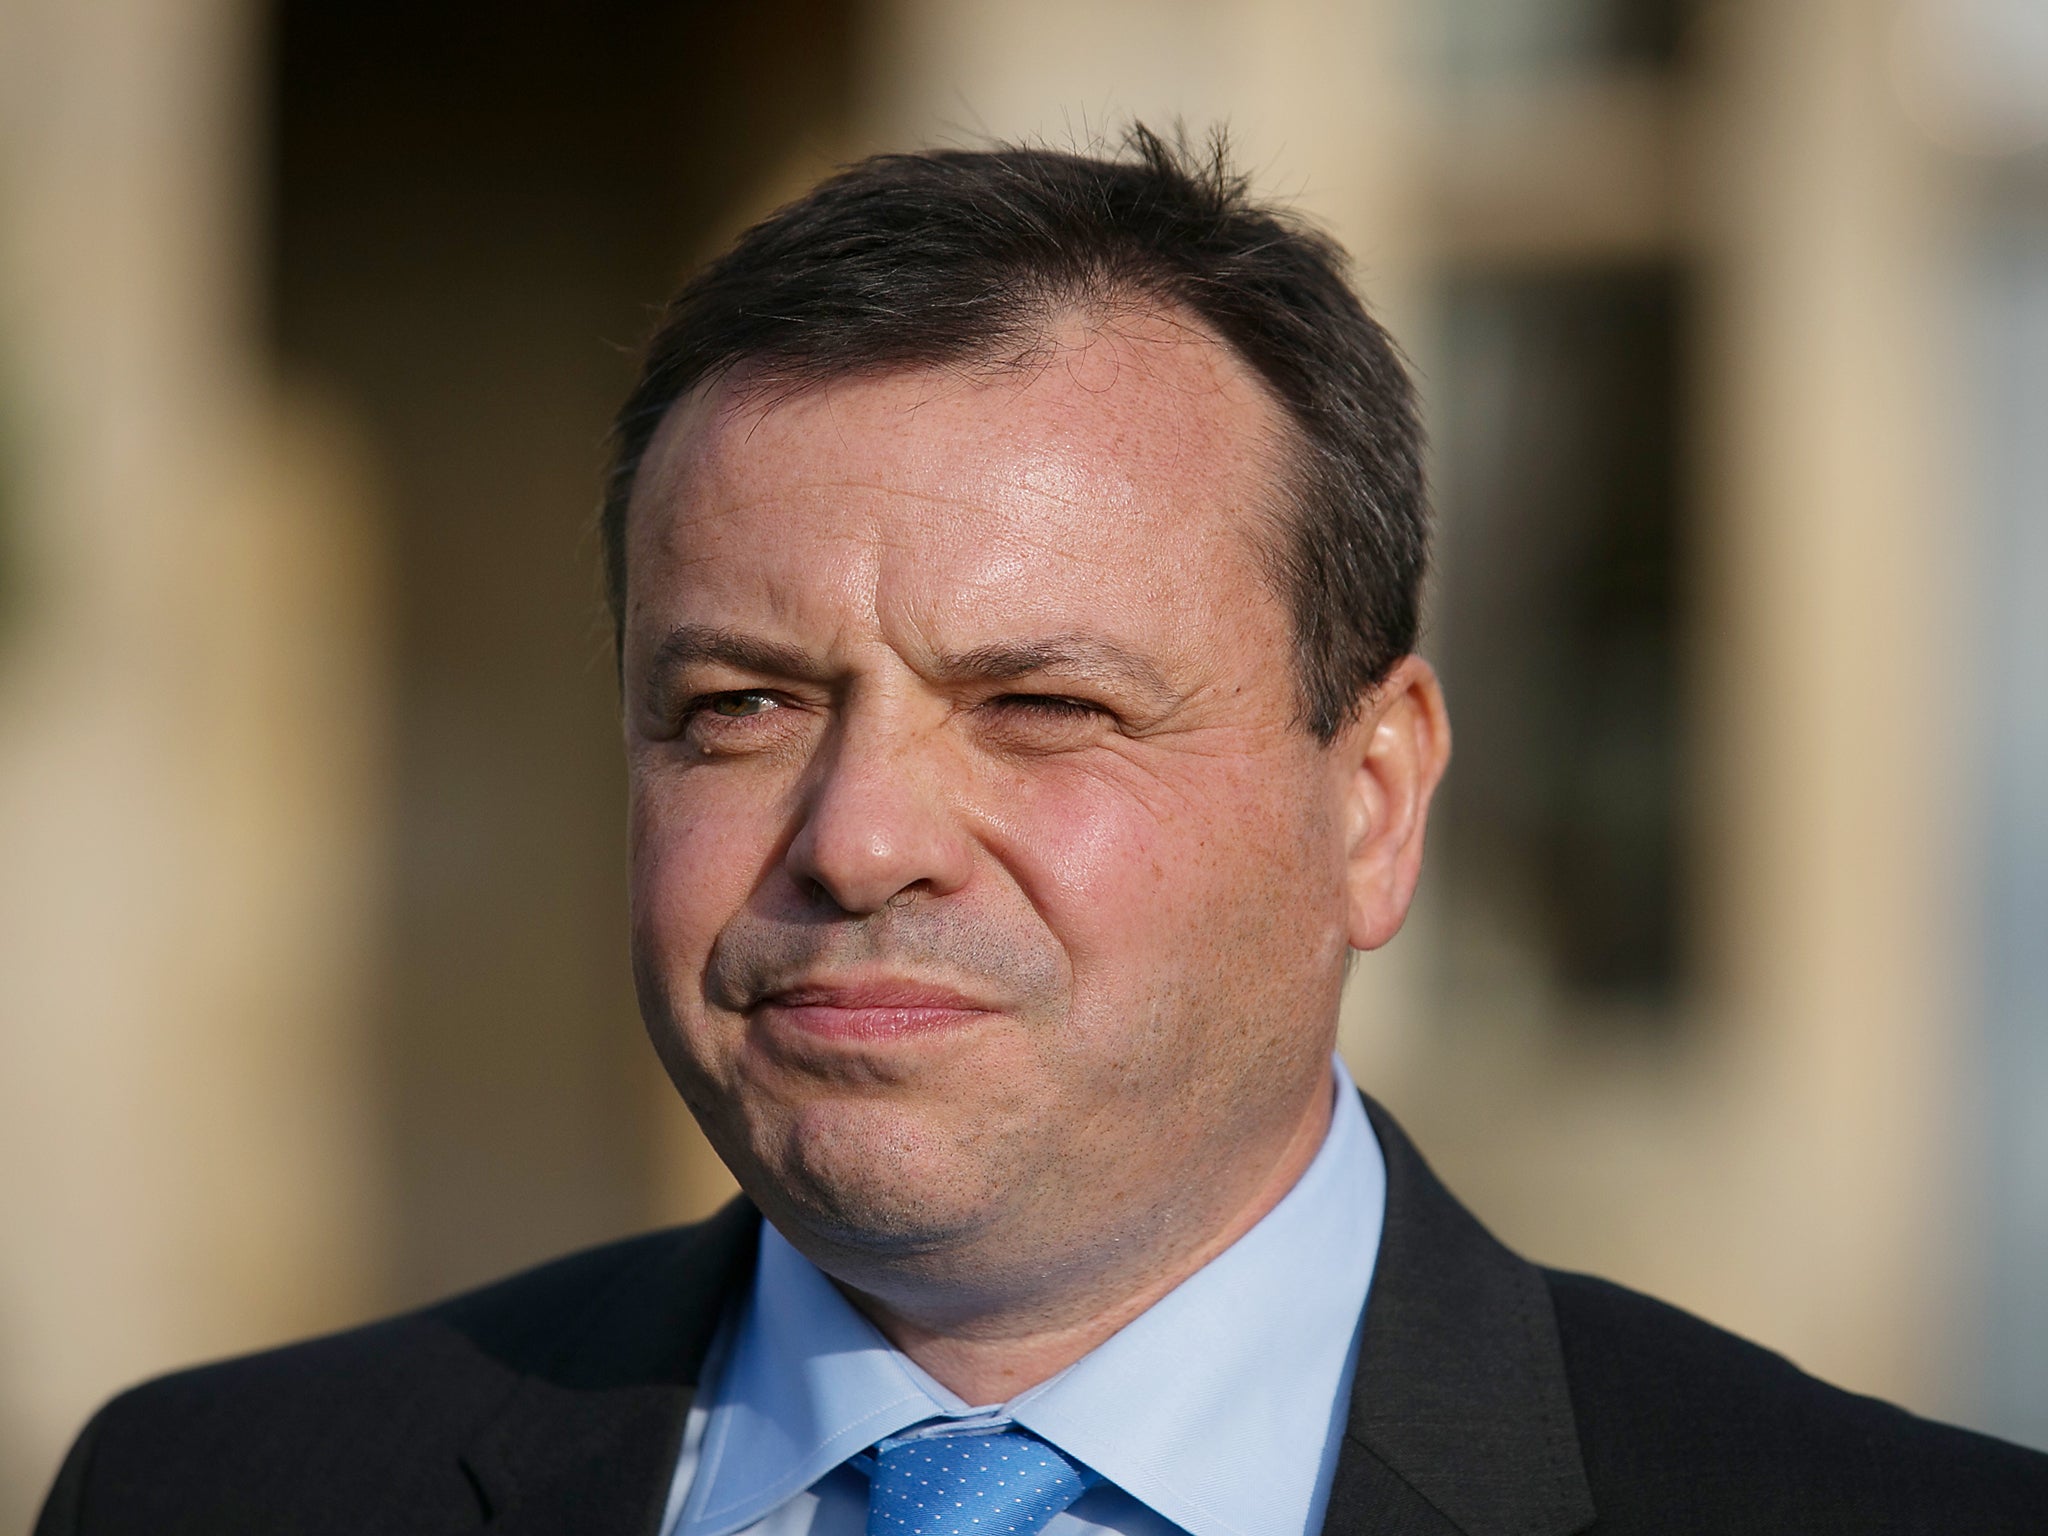 Leave.EU funder Arron Banks is refusing to appear before a committee of MPs